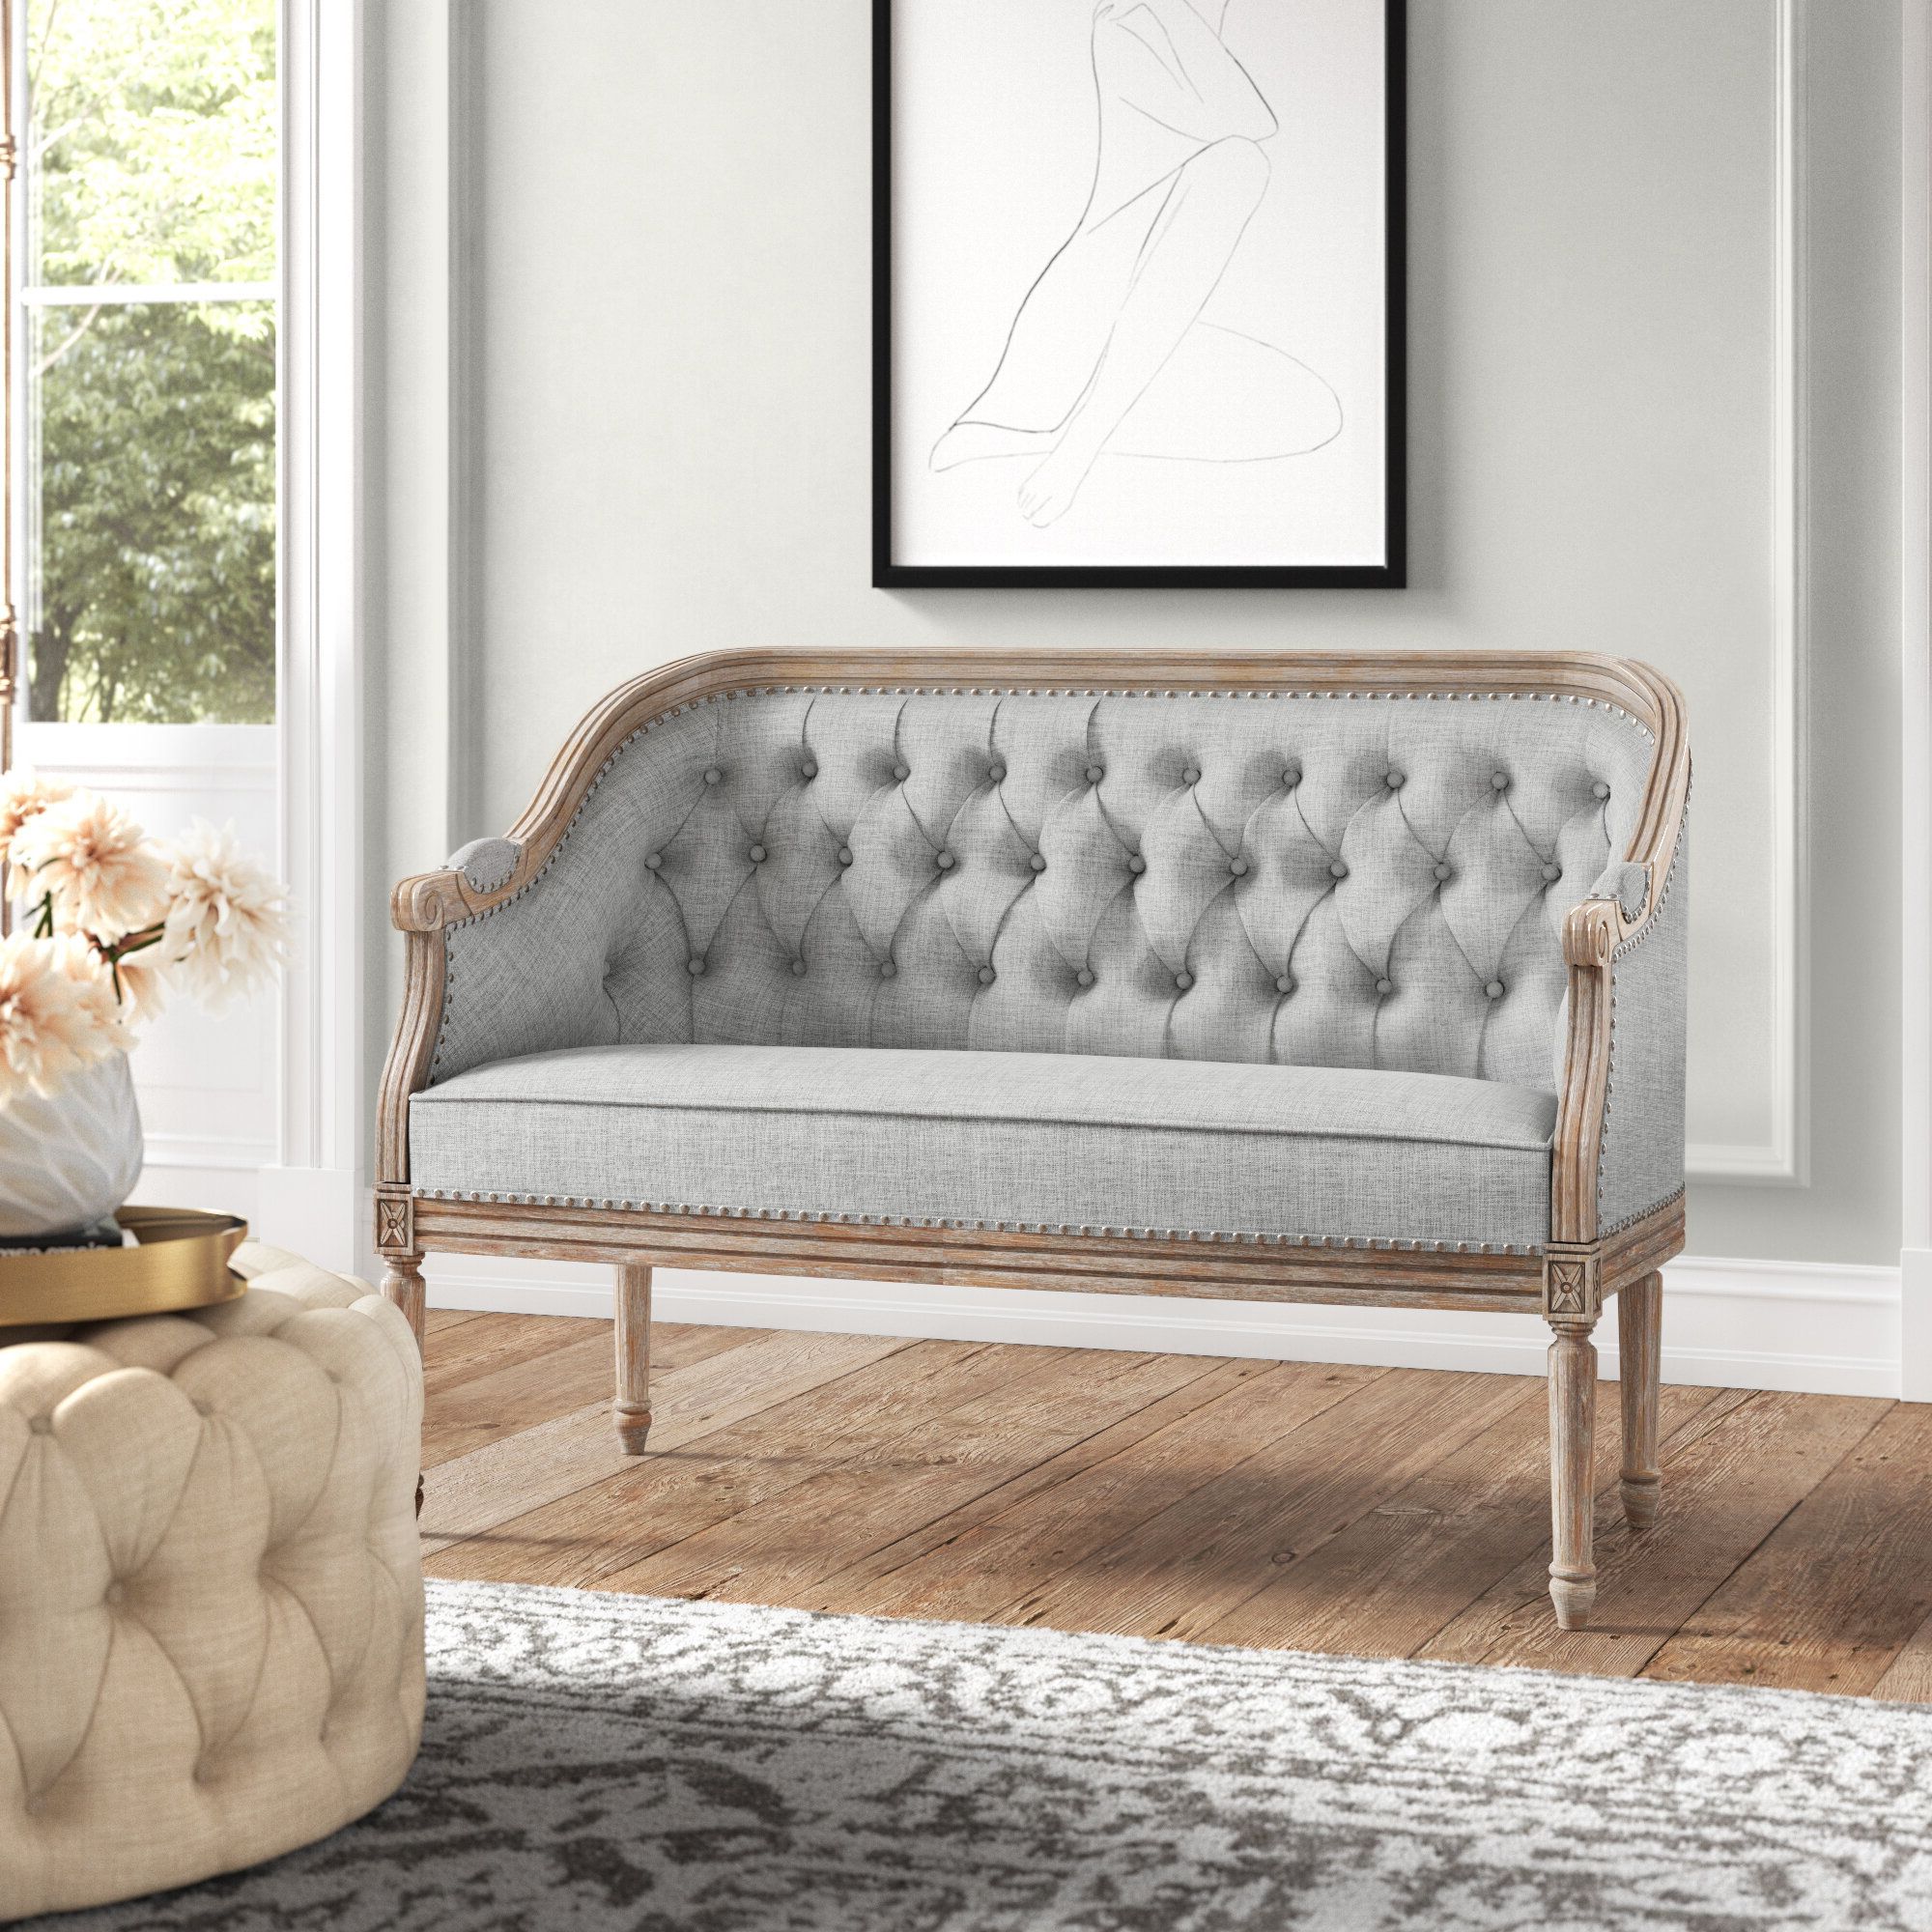 Blue Elephant 2 Seater Loveseat & Reviews | Wayfair.co.uk Pertaining To Couches Love Seats With Wood Frame (Gallery 8 of 20)